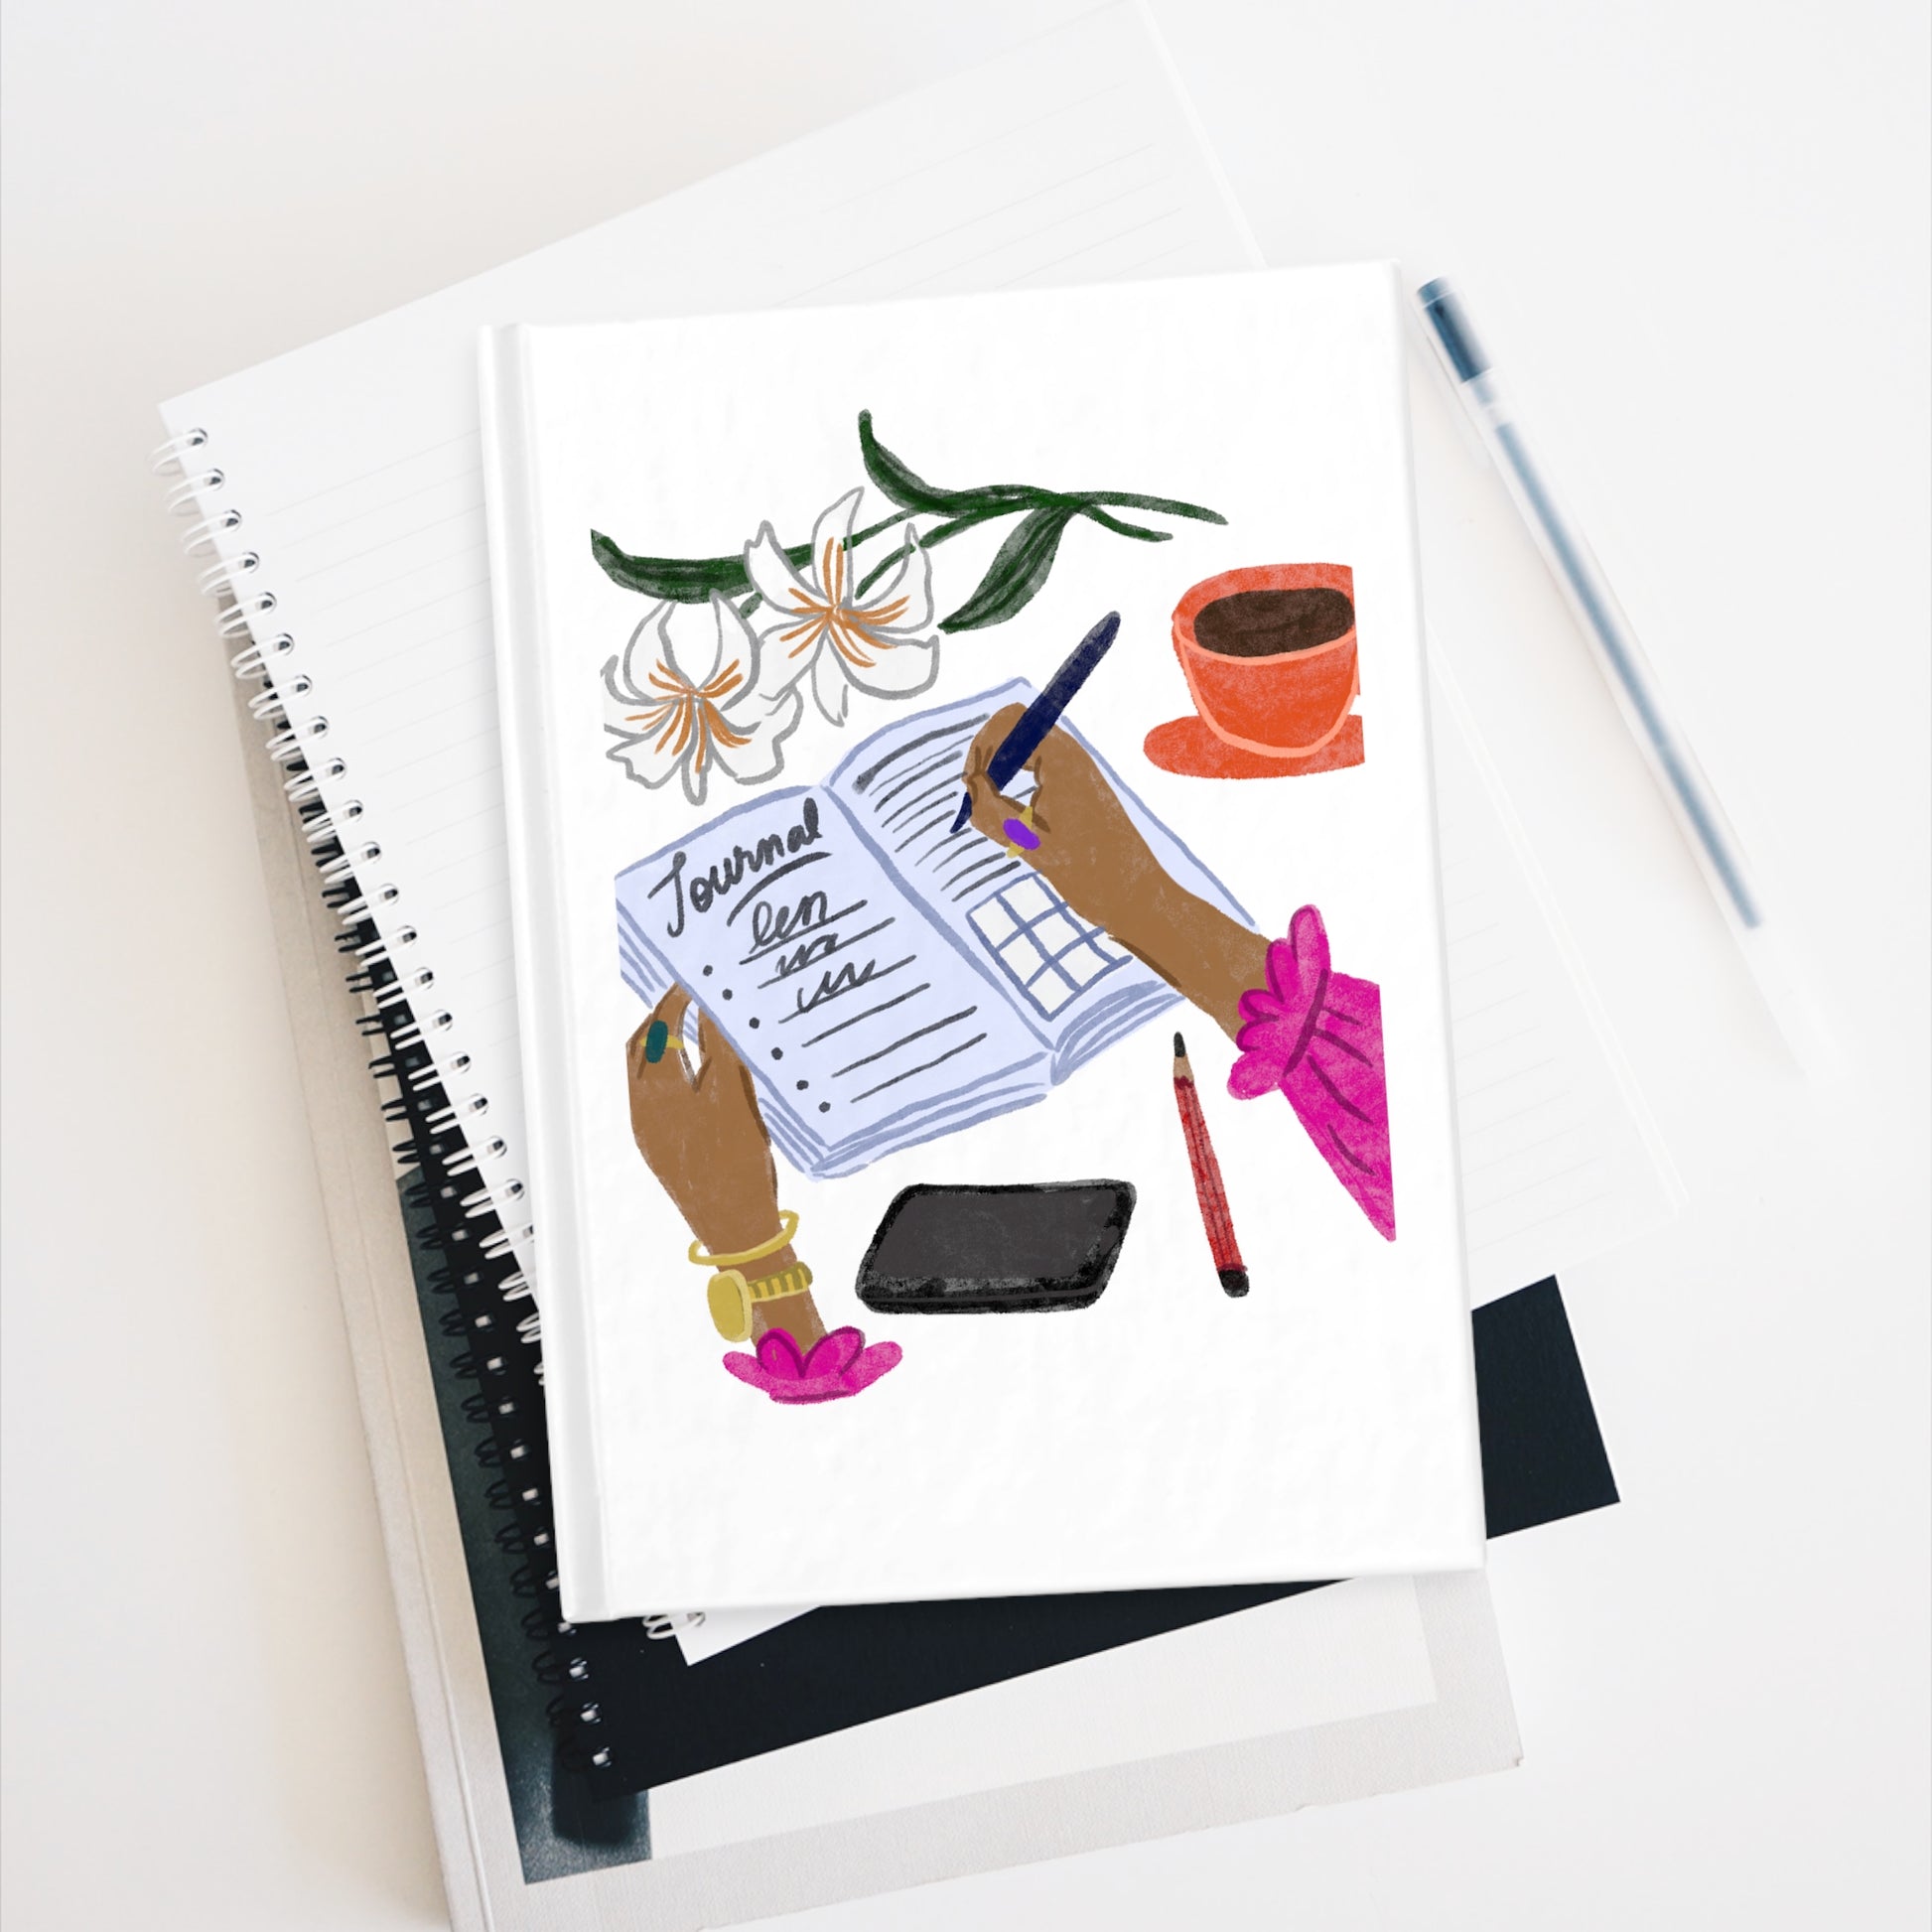 "Elegant lady writing in a journal with a cup of tea and a flower - Blank Journal Cover"